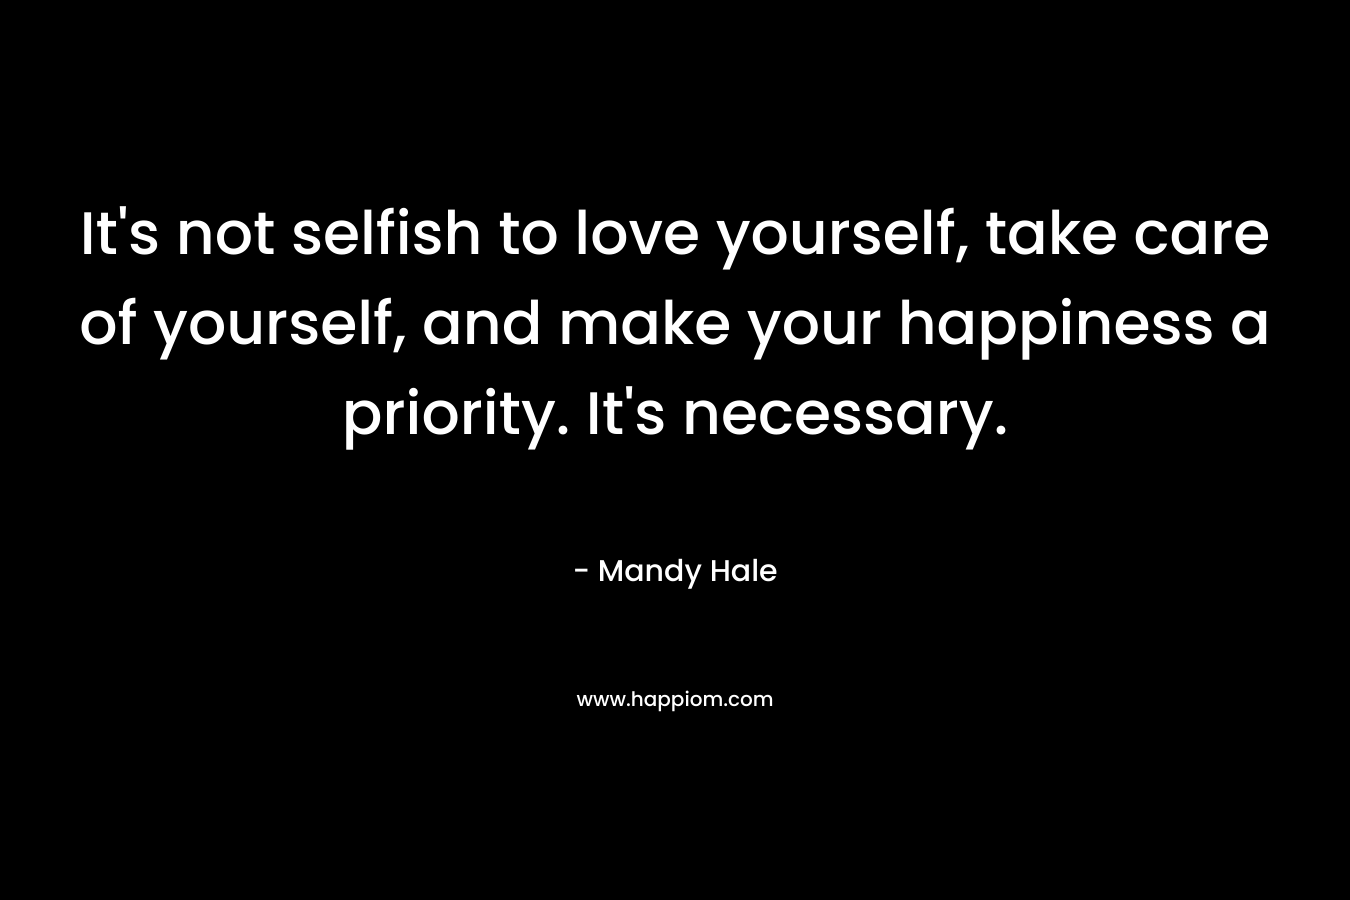 It’s not selfish to love yourself, take care of yourself, and make your happiness a priority. It’s necessary. – Mandy Hale